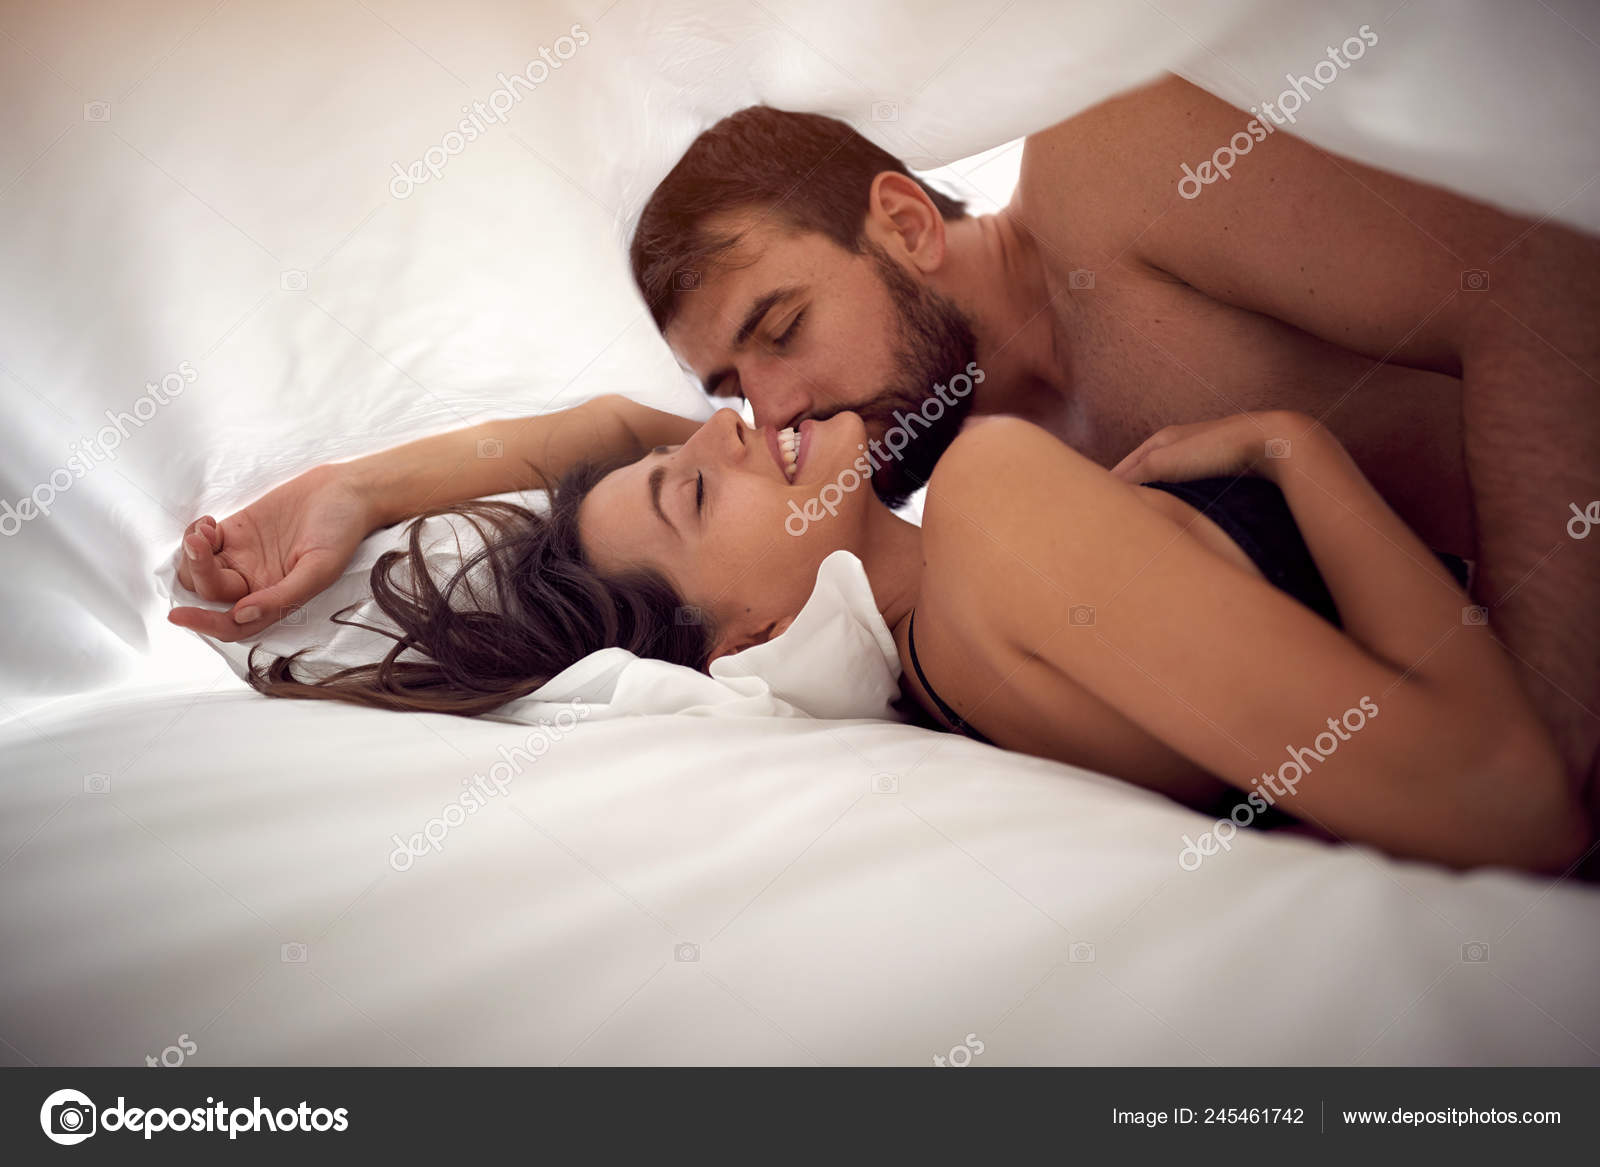 husband and wife making passionate love